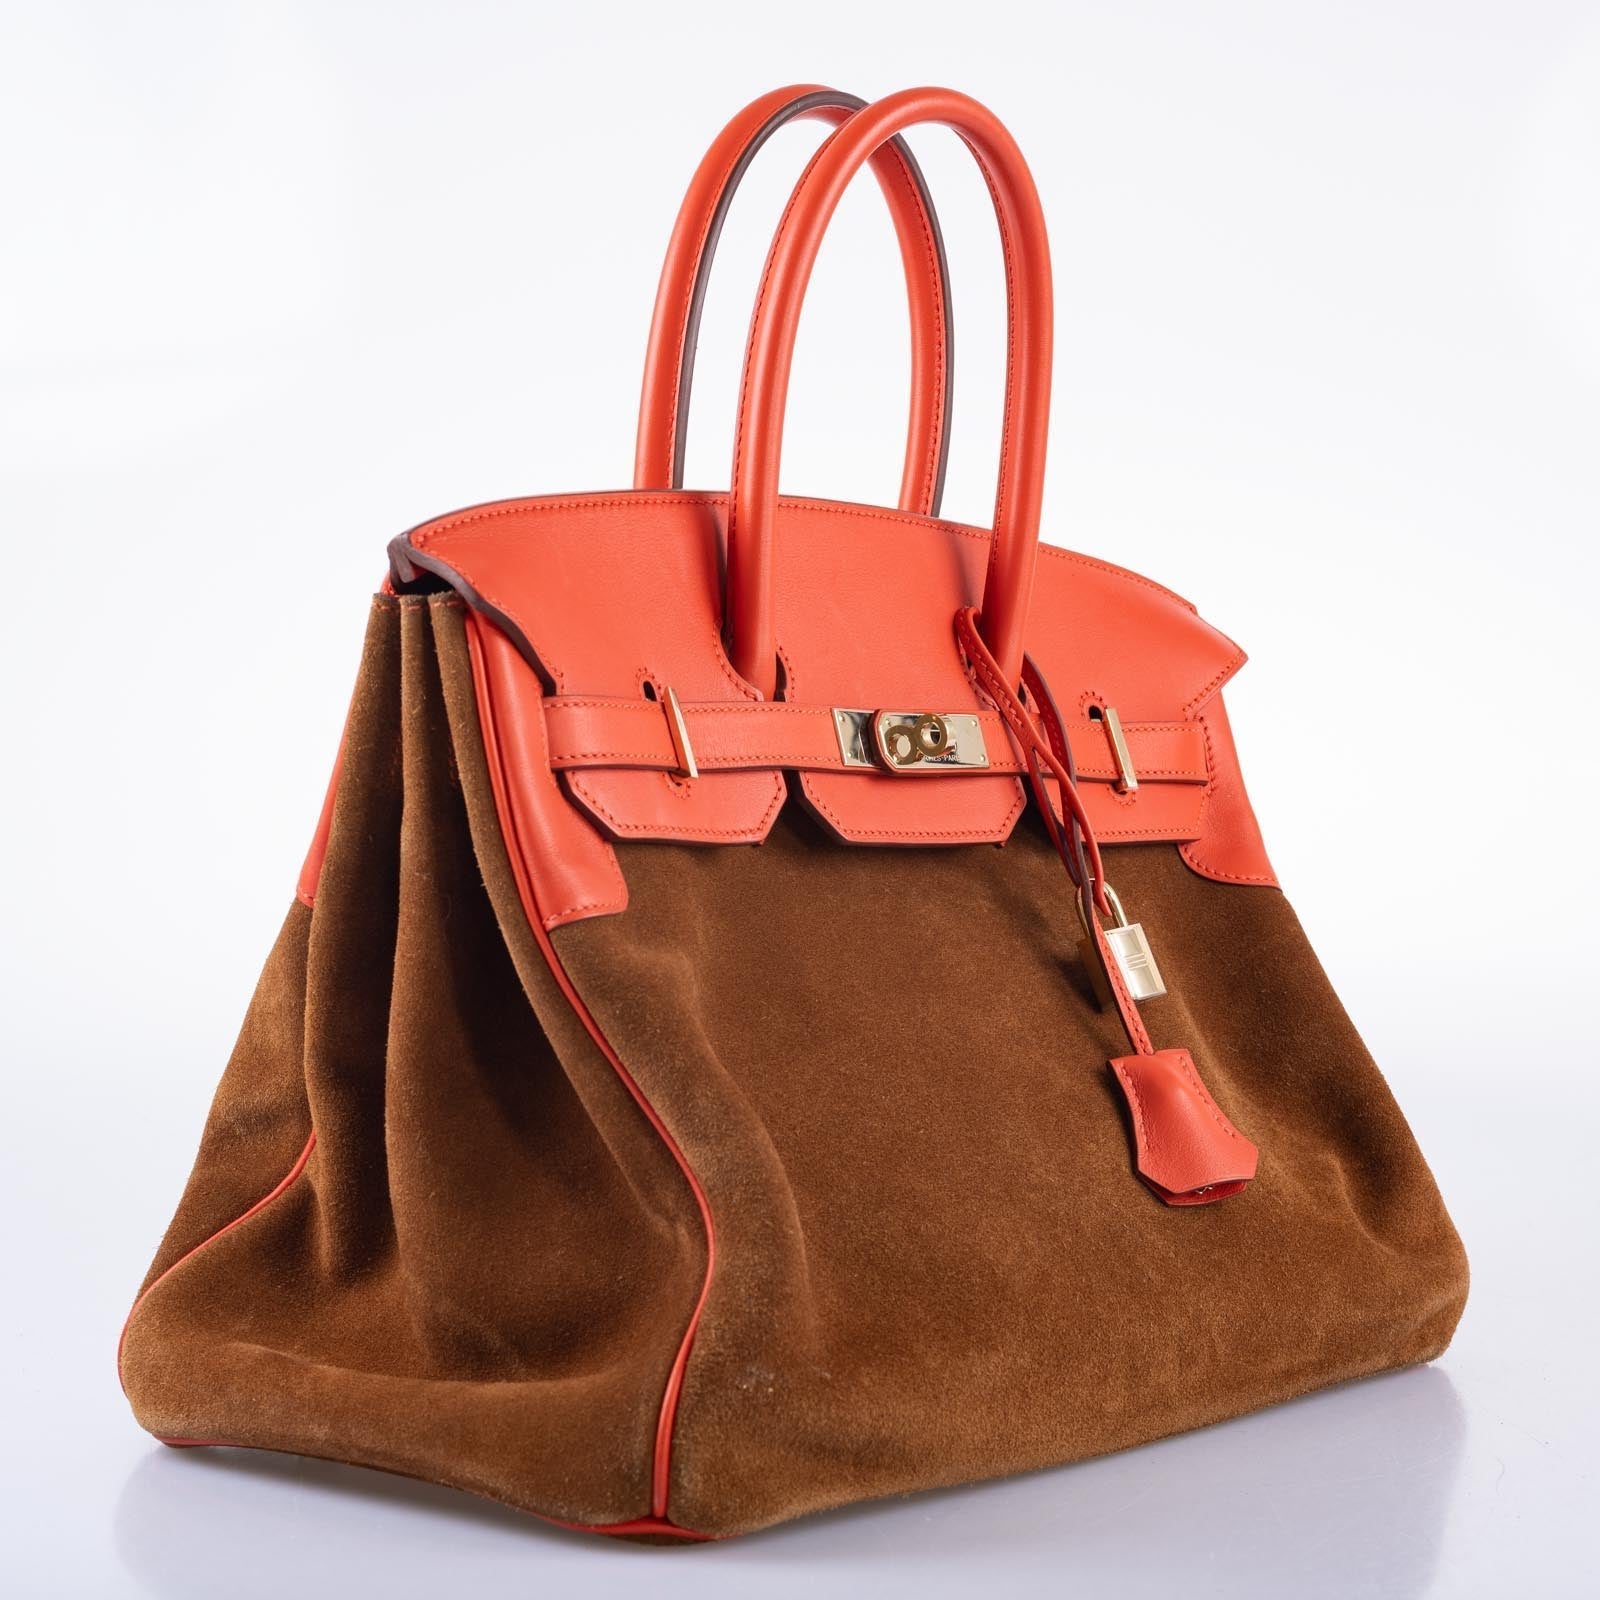 Hermès Grizzly Birkin 35 Capucine Evercolor and Fauve Suede Permabrass Hardware